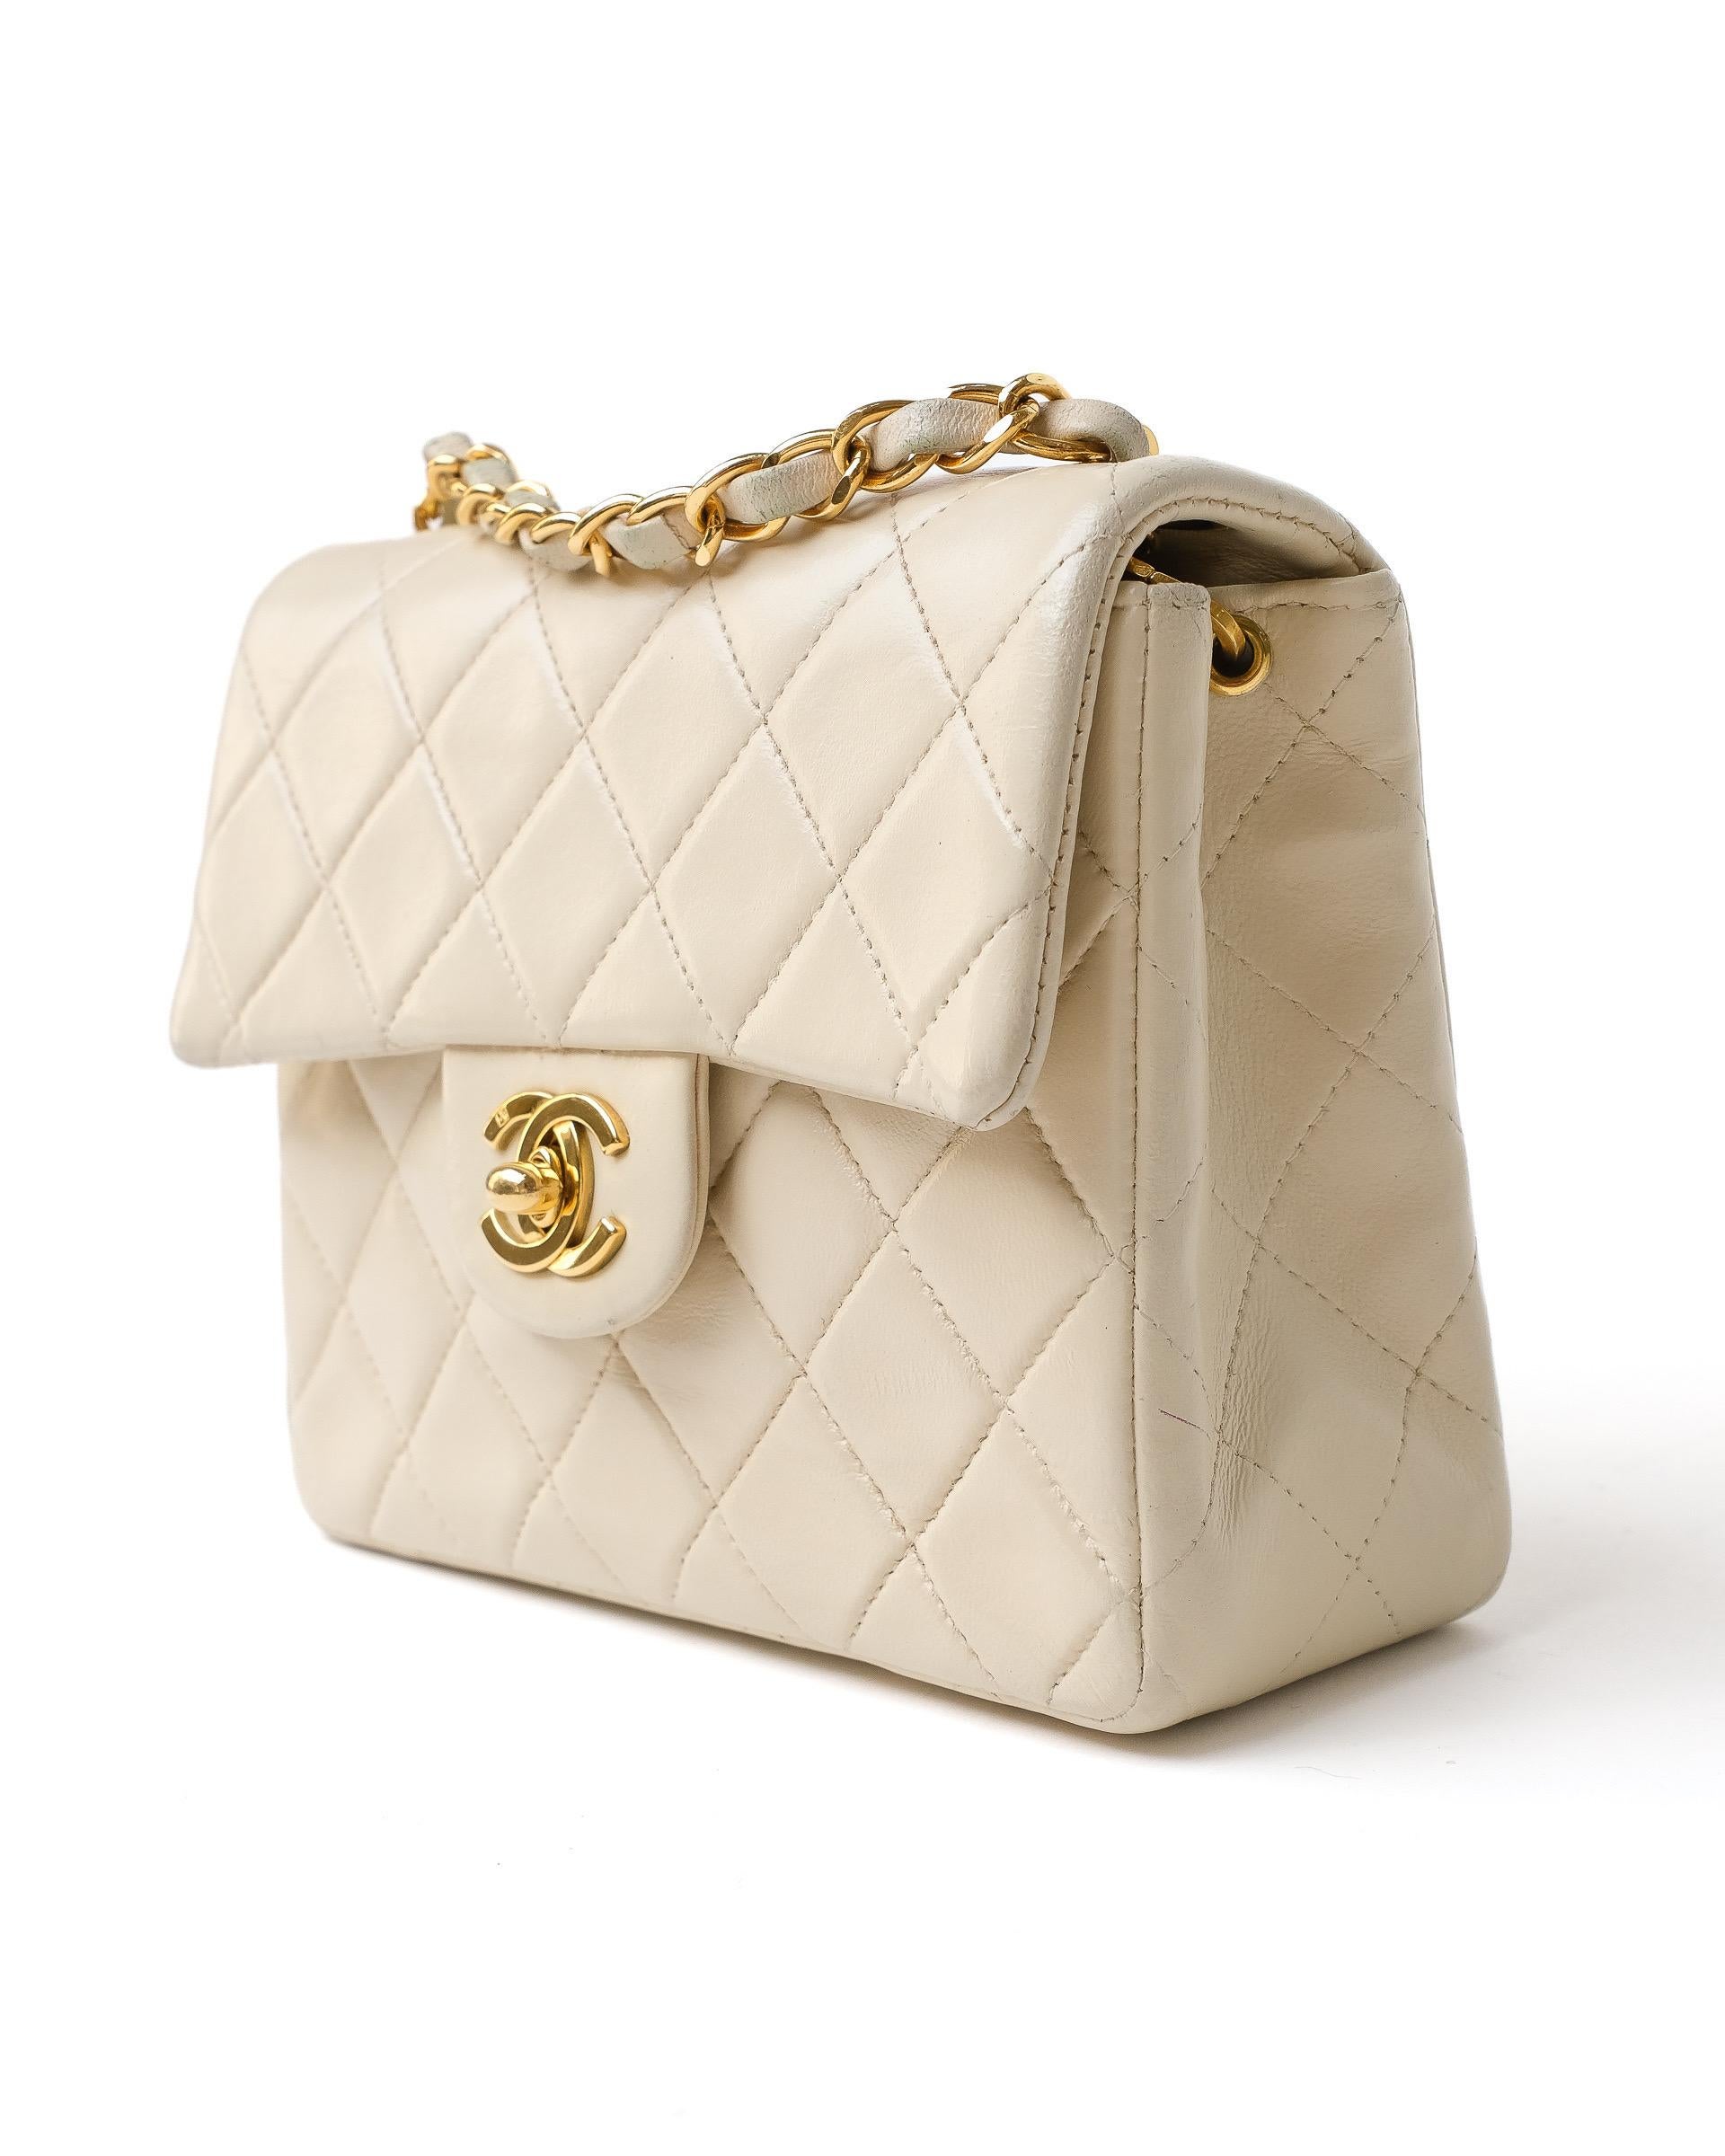 Chanel Mini Flap Timeless Crema In Good Condition For Sale In Torre Del Greco, IT